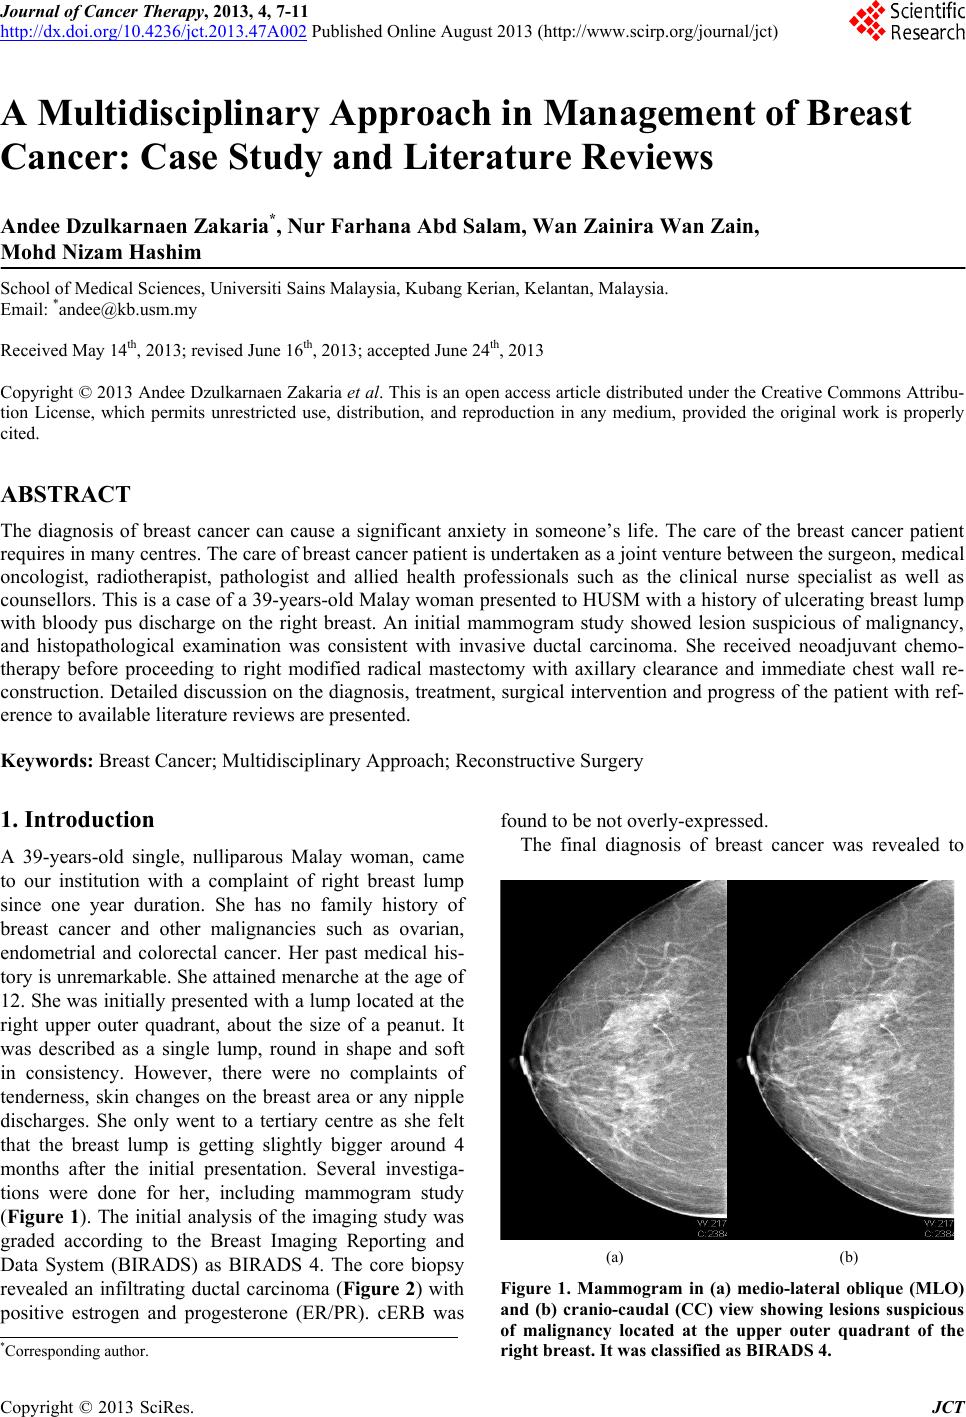 breast cancer now case study